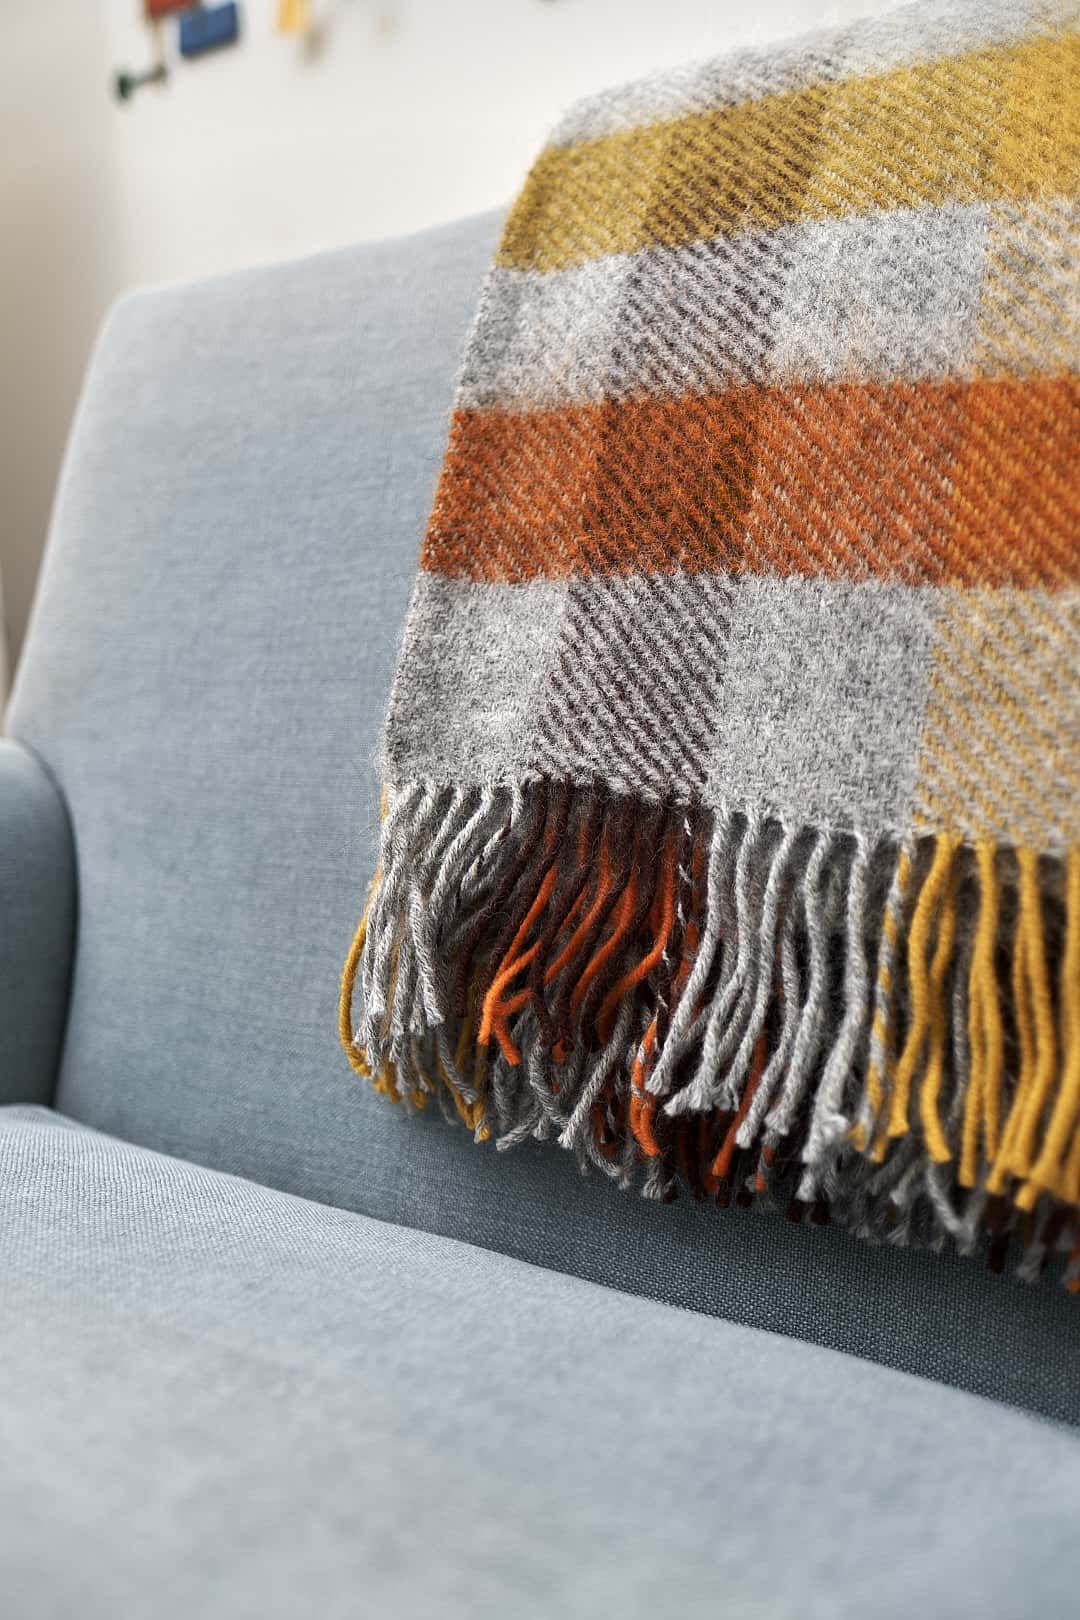 A Klippan Gotland Wool Throw – Multi Yellow on a couch in a living room.